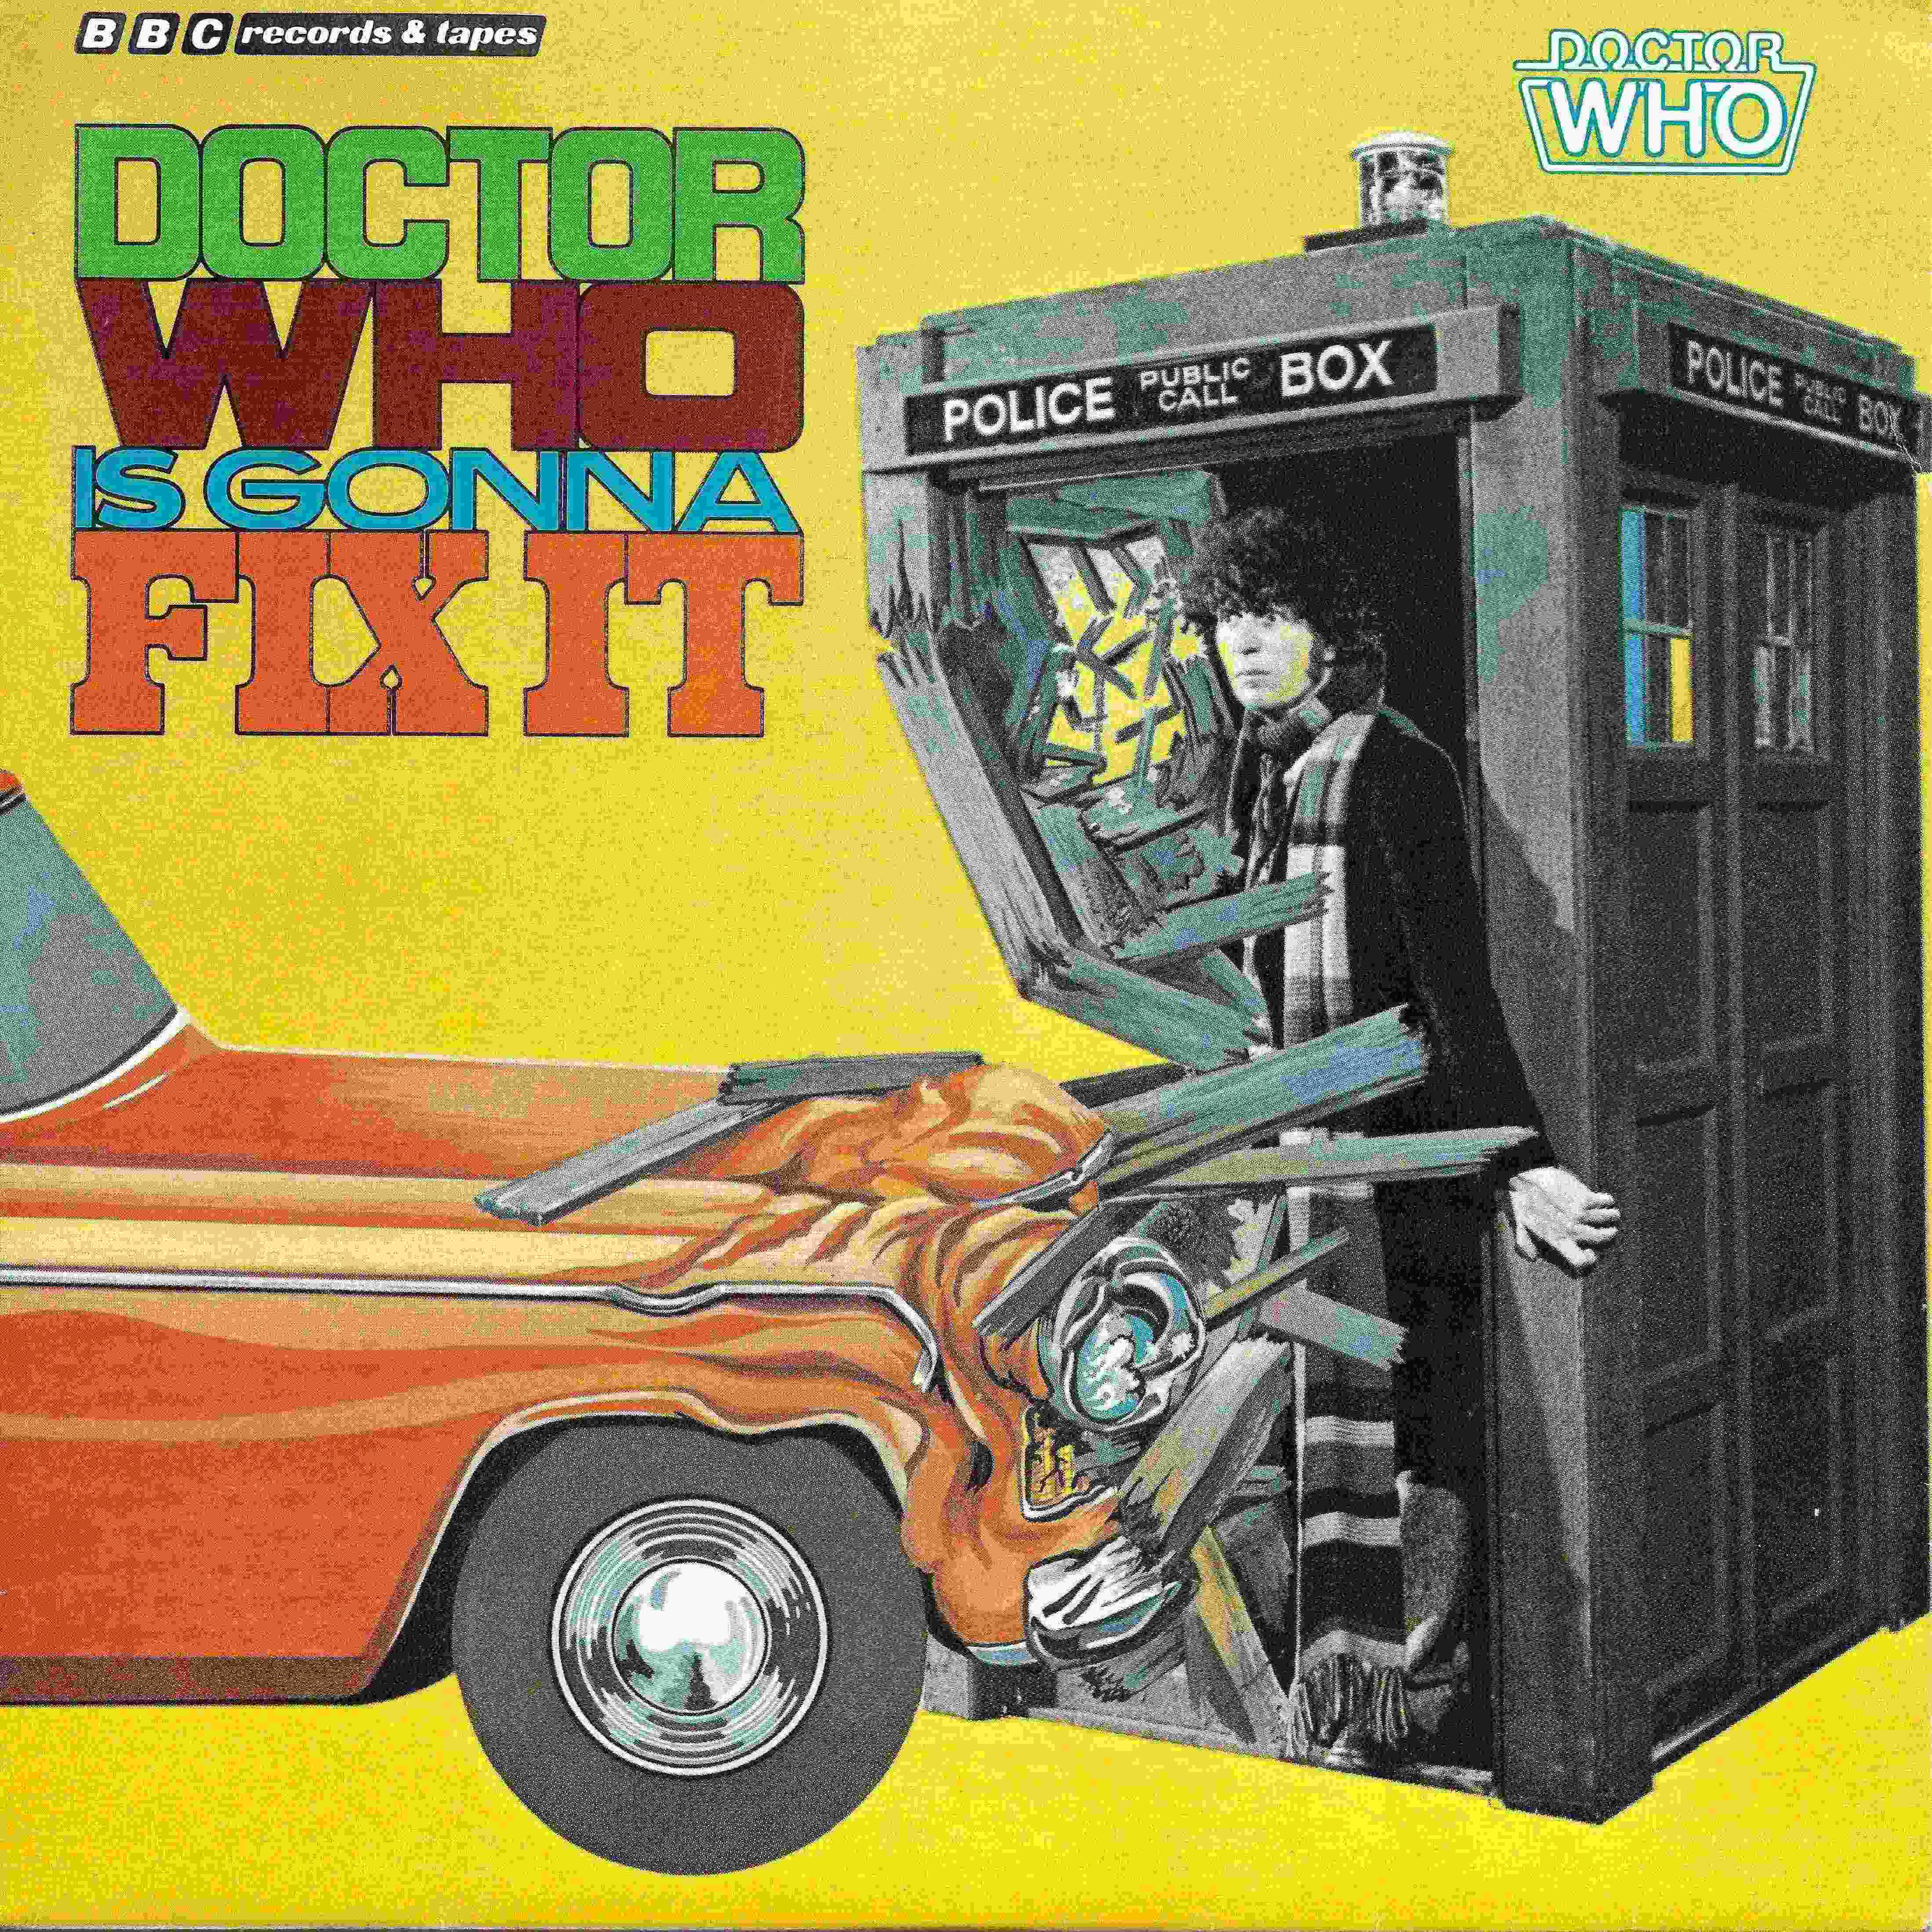 Picture of BBC - 454 Doctor who is gonna fix it (US import) by artist Bullamakanka from the BBC singles - Records and Tapes library